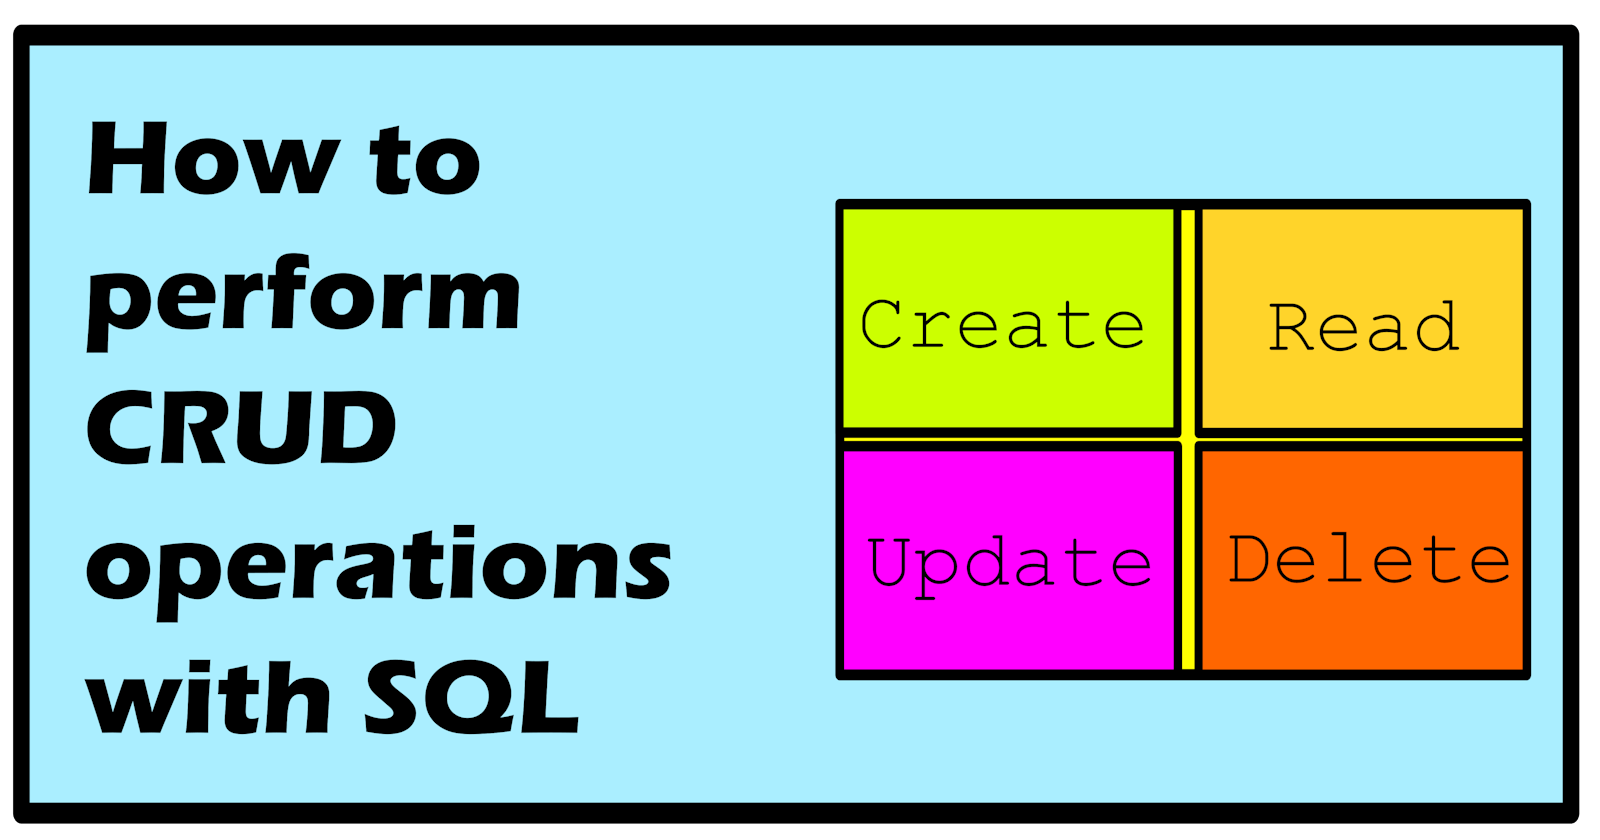 How to perform CRUD operations with SQL